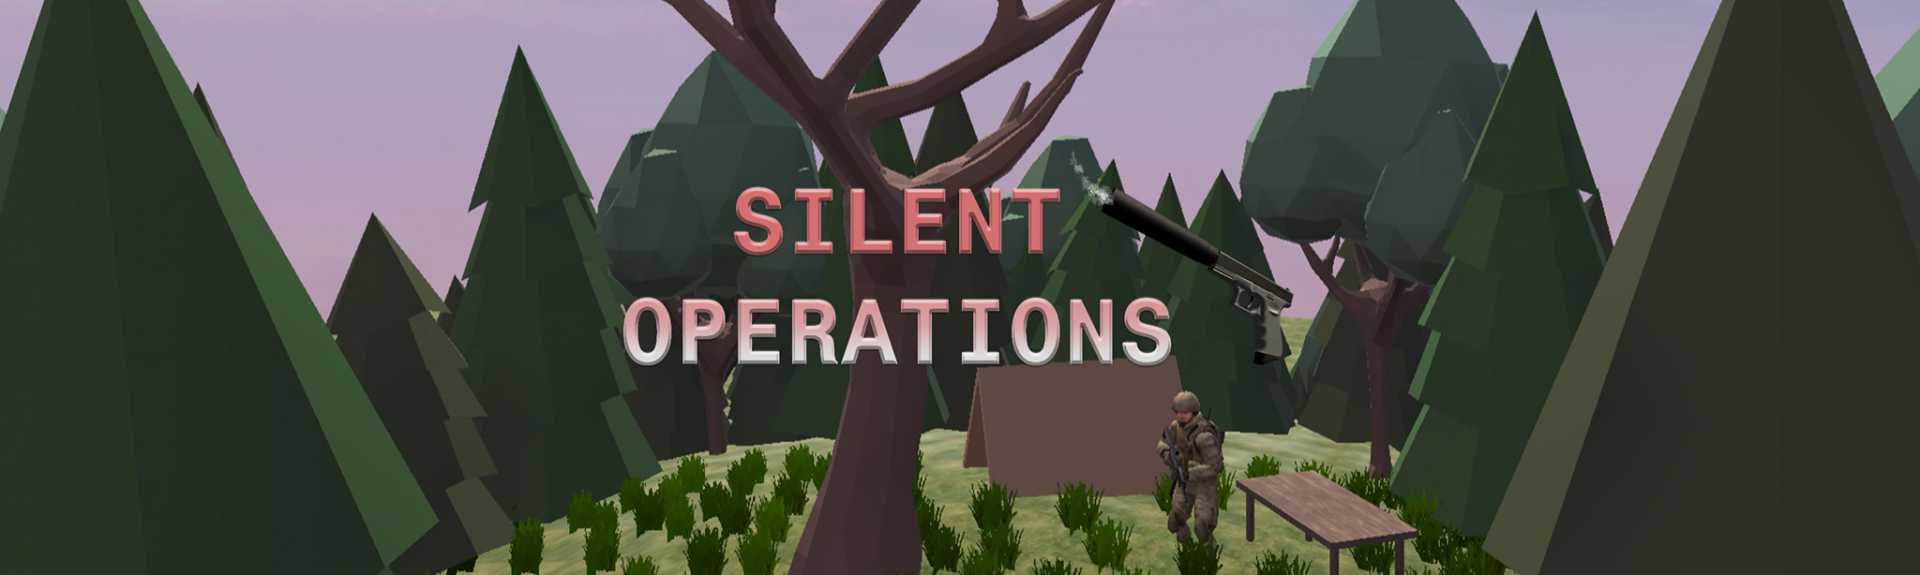 Silent Operations